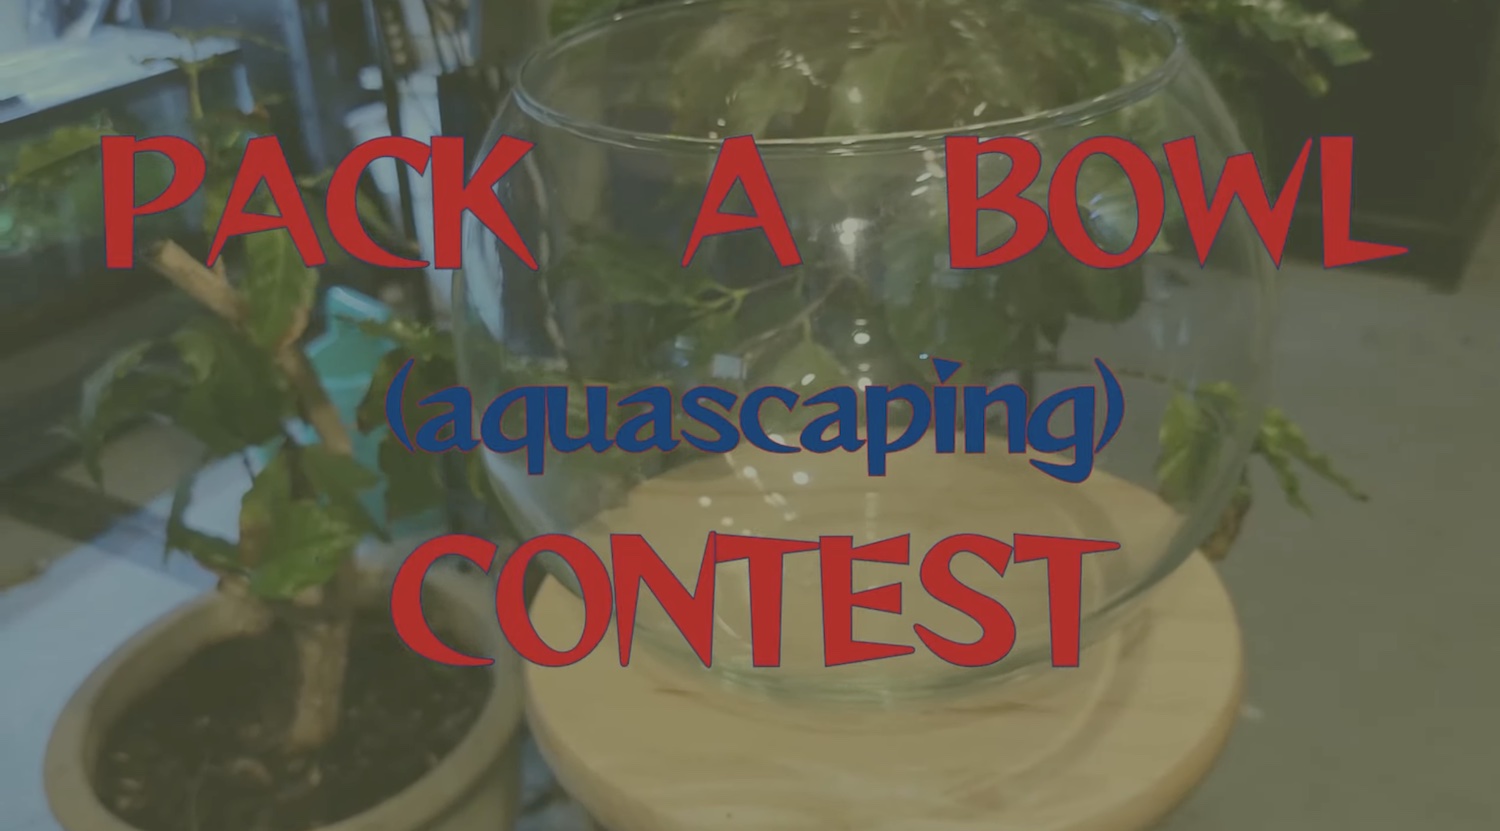 Pack a Bowl Scaping Contest